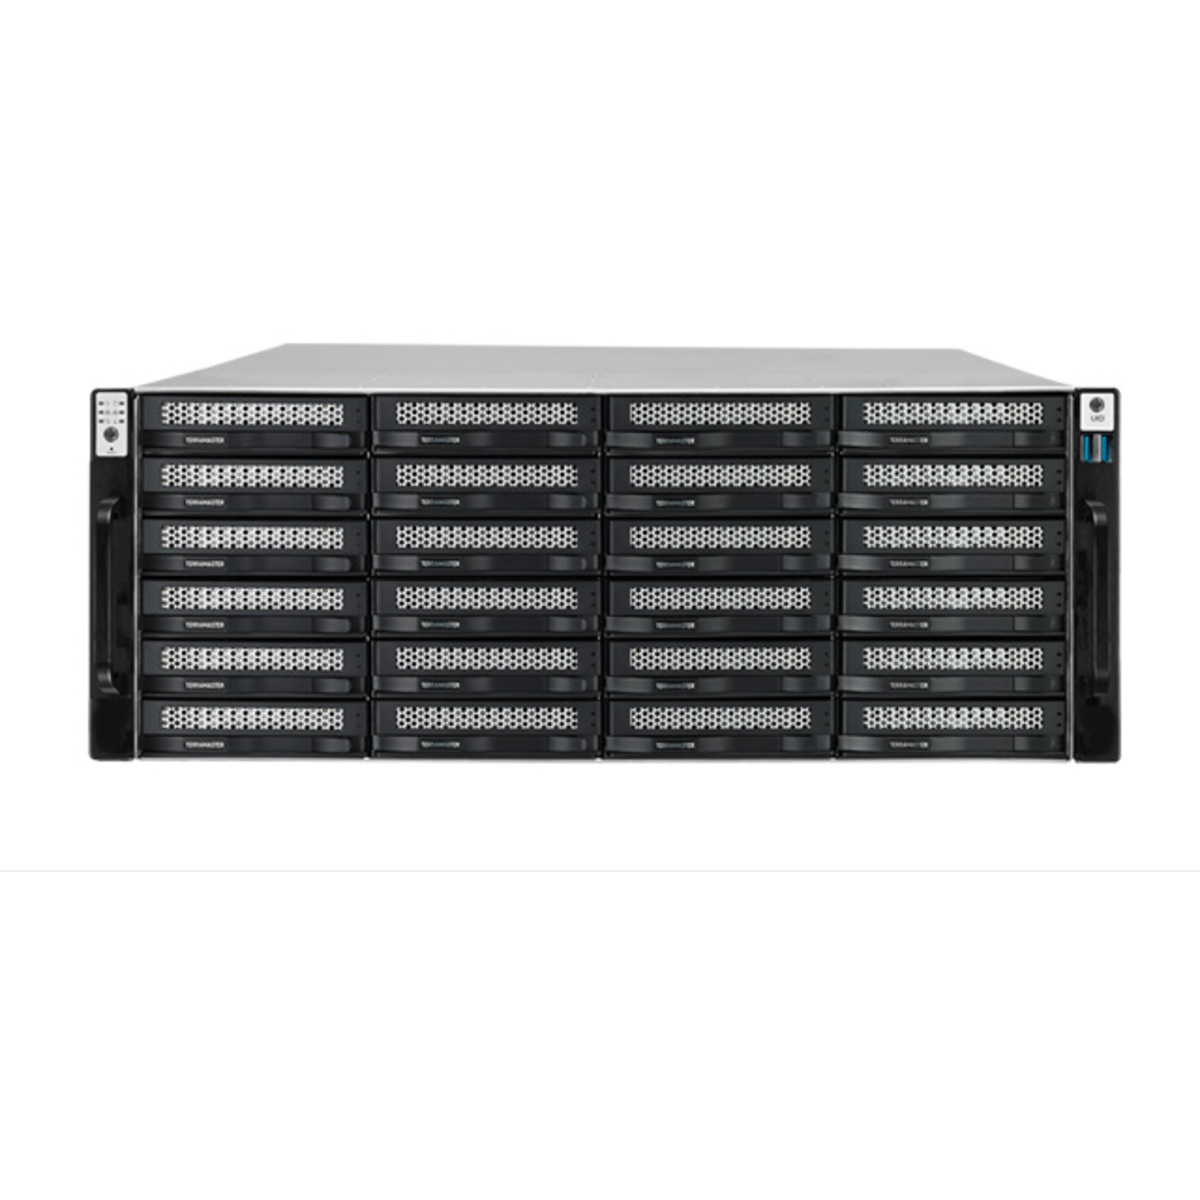 TerraMaster U24-722-2224 460tb 24-Bay RackMount Large Business / Enterprise NAS - Network Attached Storage Device 23x20tb Seagate EXOS X20 ST20000NM007D 3.5 7200rpm SATA 6Gb/s HDD ENTERPRISE Class Drives Installed - Burn-In Tested U24-722-2224